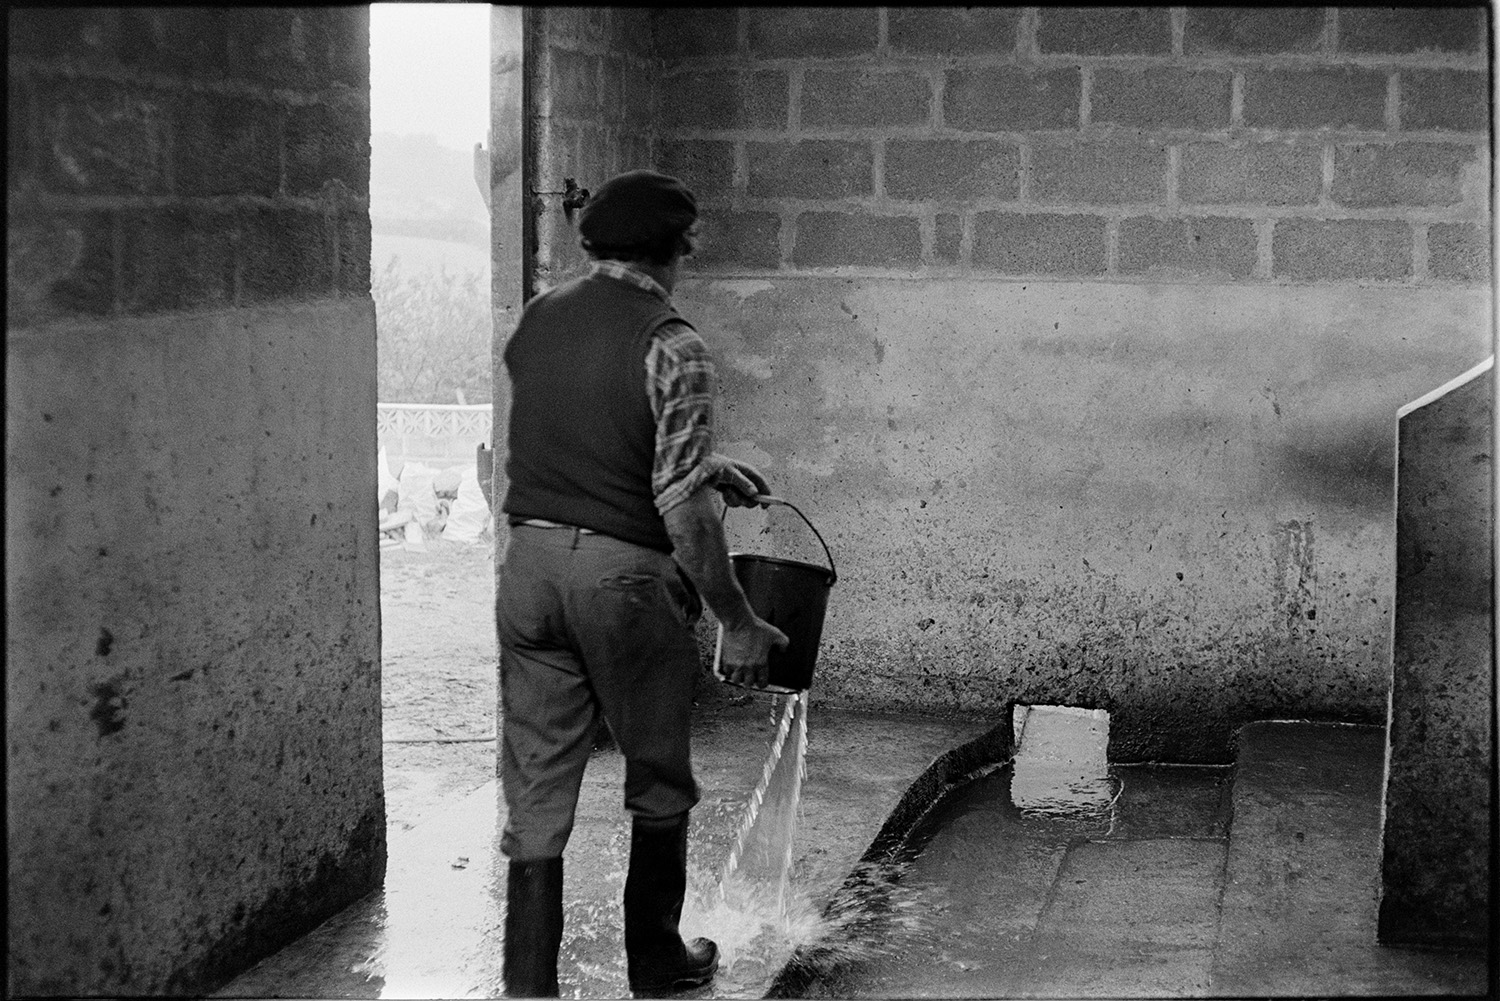 Farmer washing out milking parlour after milking. 
[William Medland washing the milking parlour at Hallcourt, Petrockstowe with a bucket of water.]